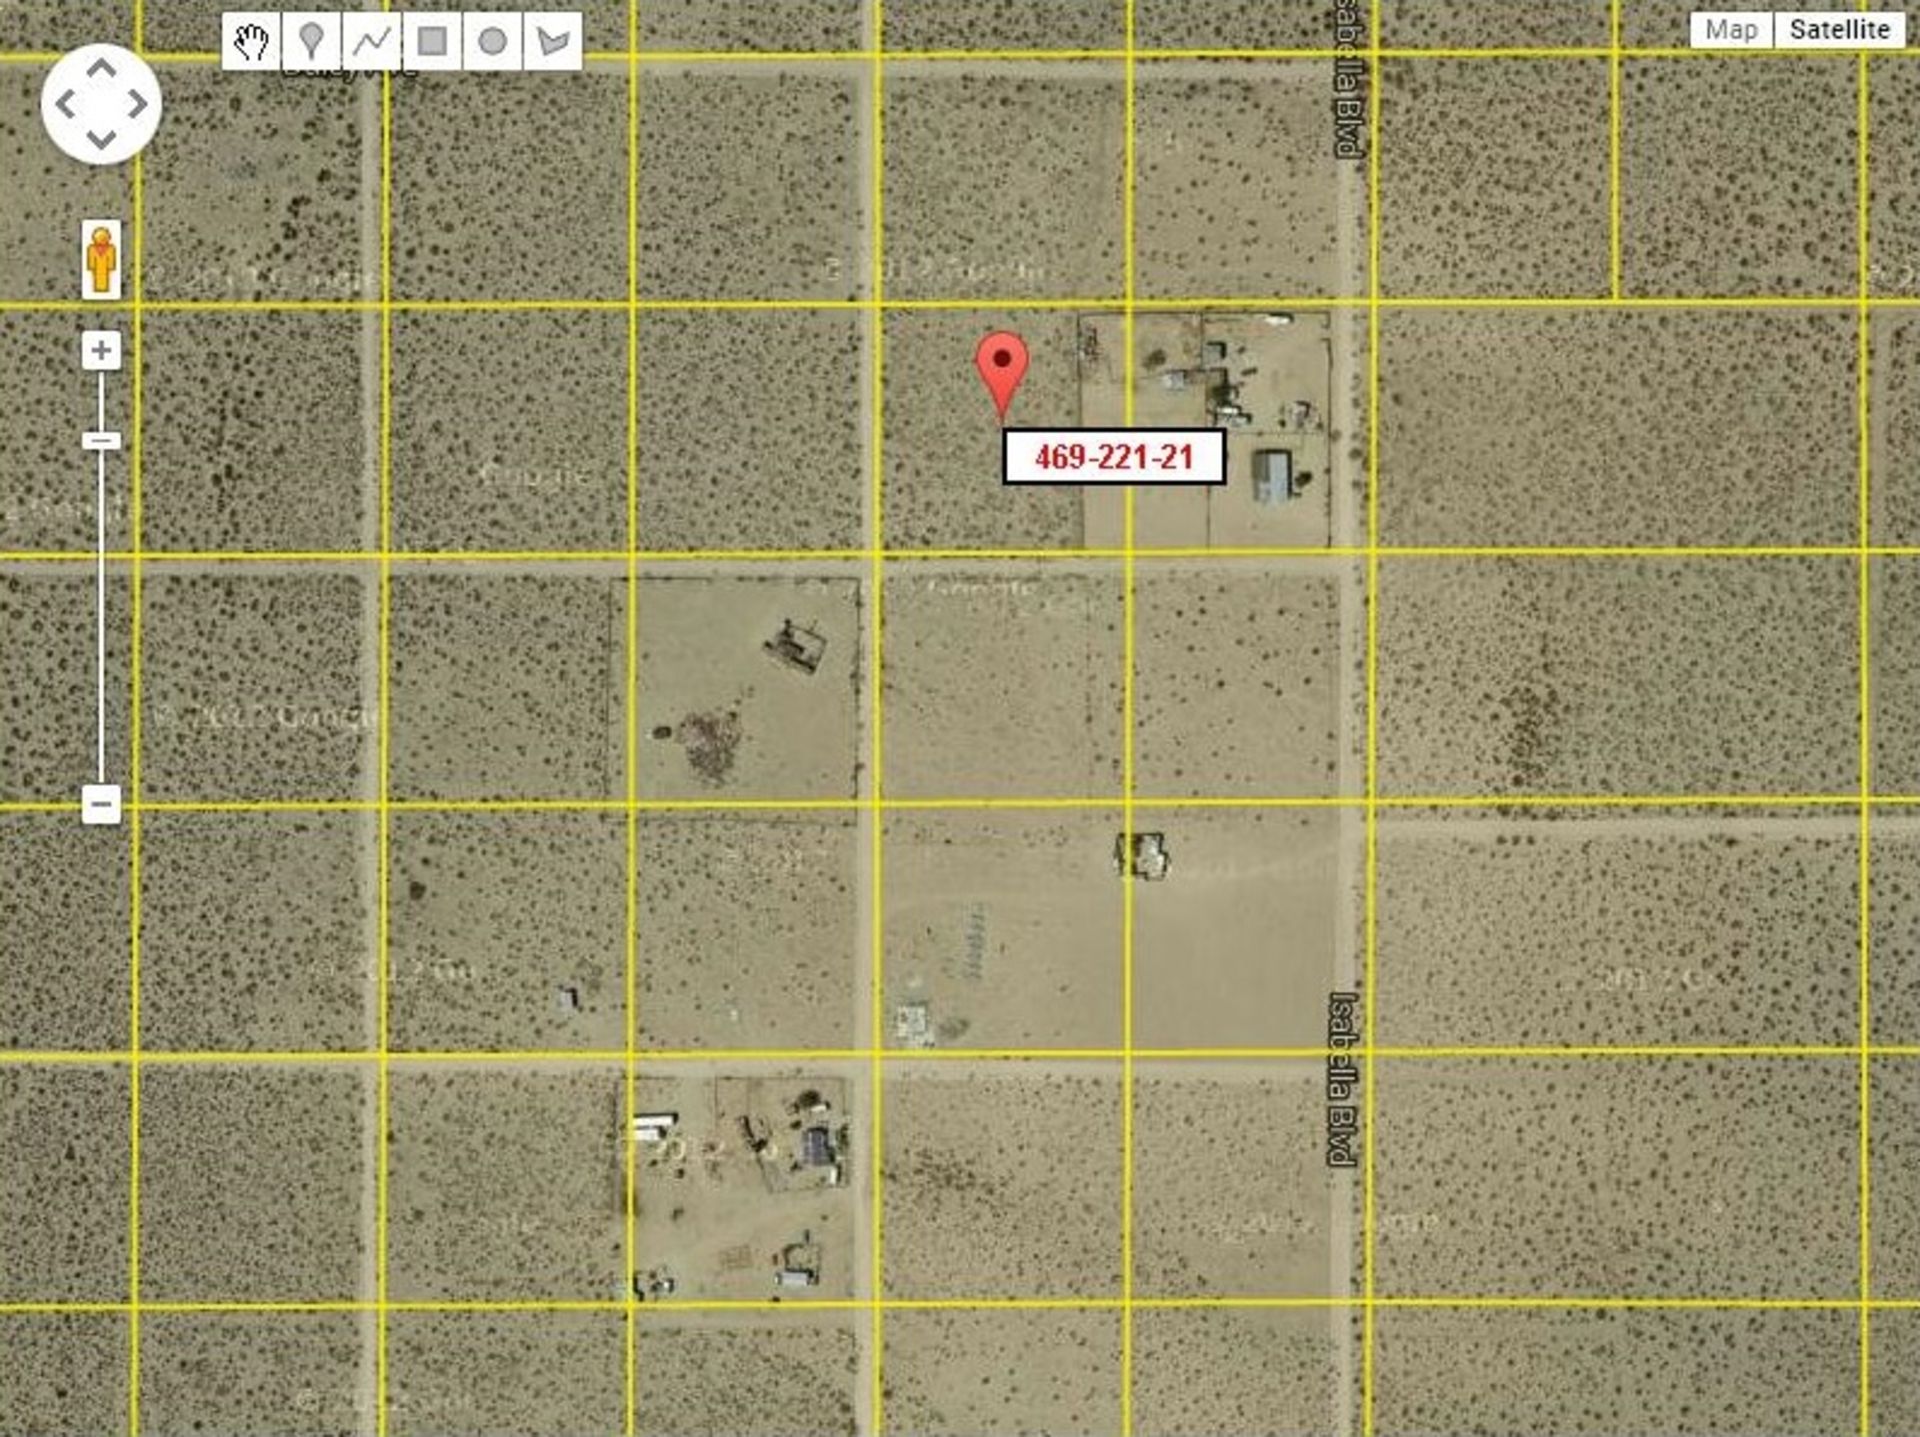 2.51 Acre Large Residential Lot in Mojave, California - Image 2 of 2